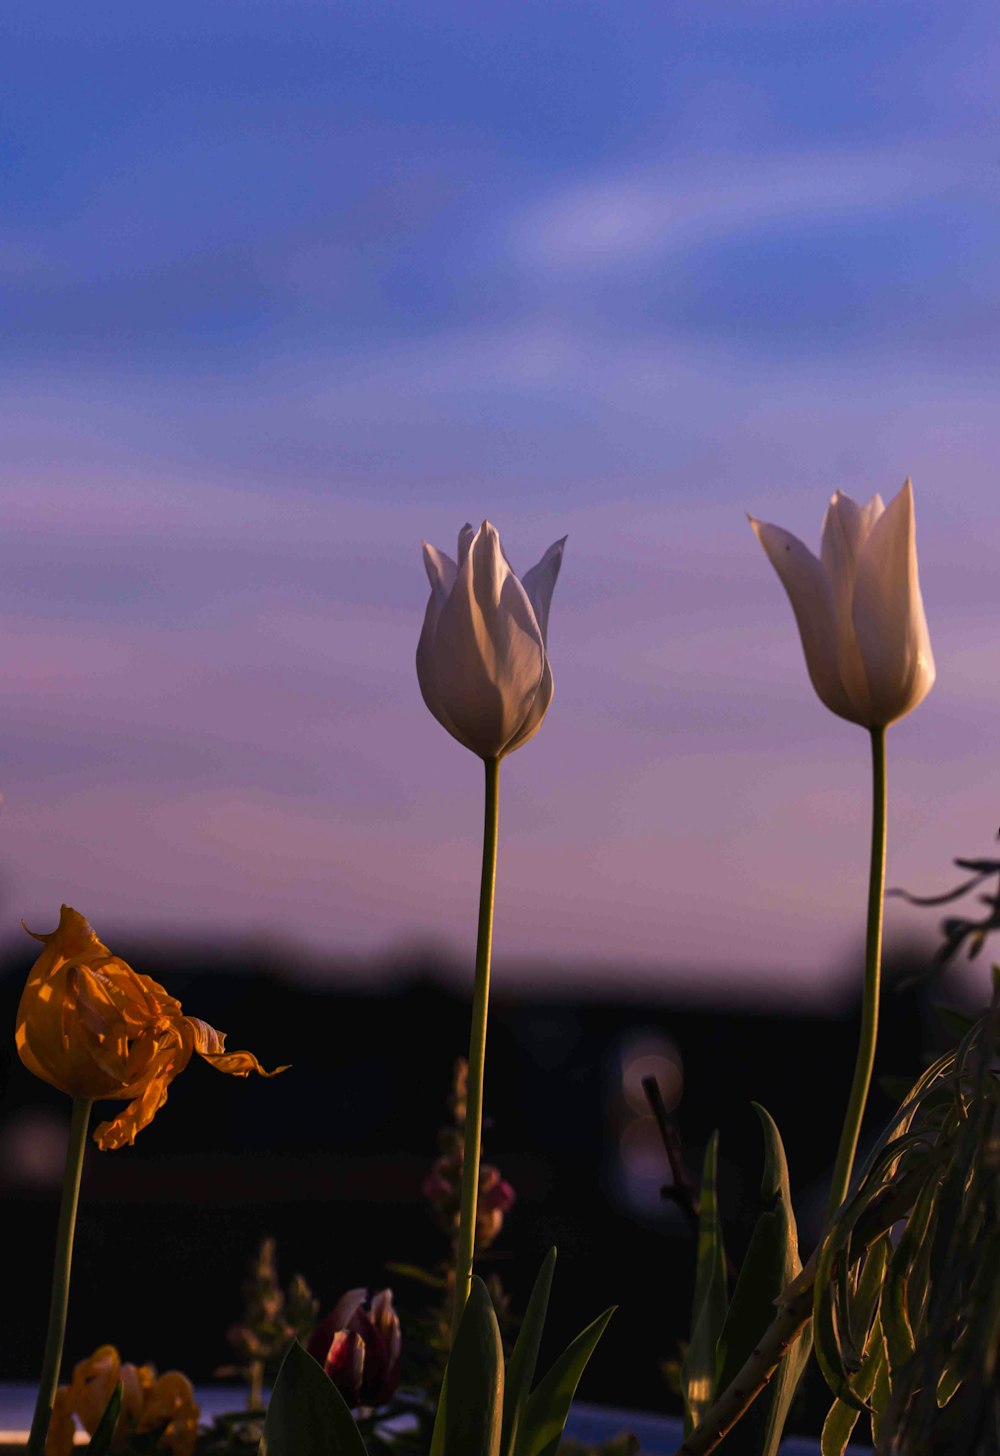 three white tulips are in the foreground with a blue sky in the